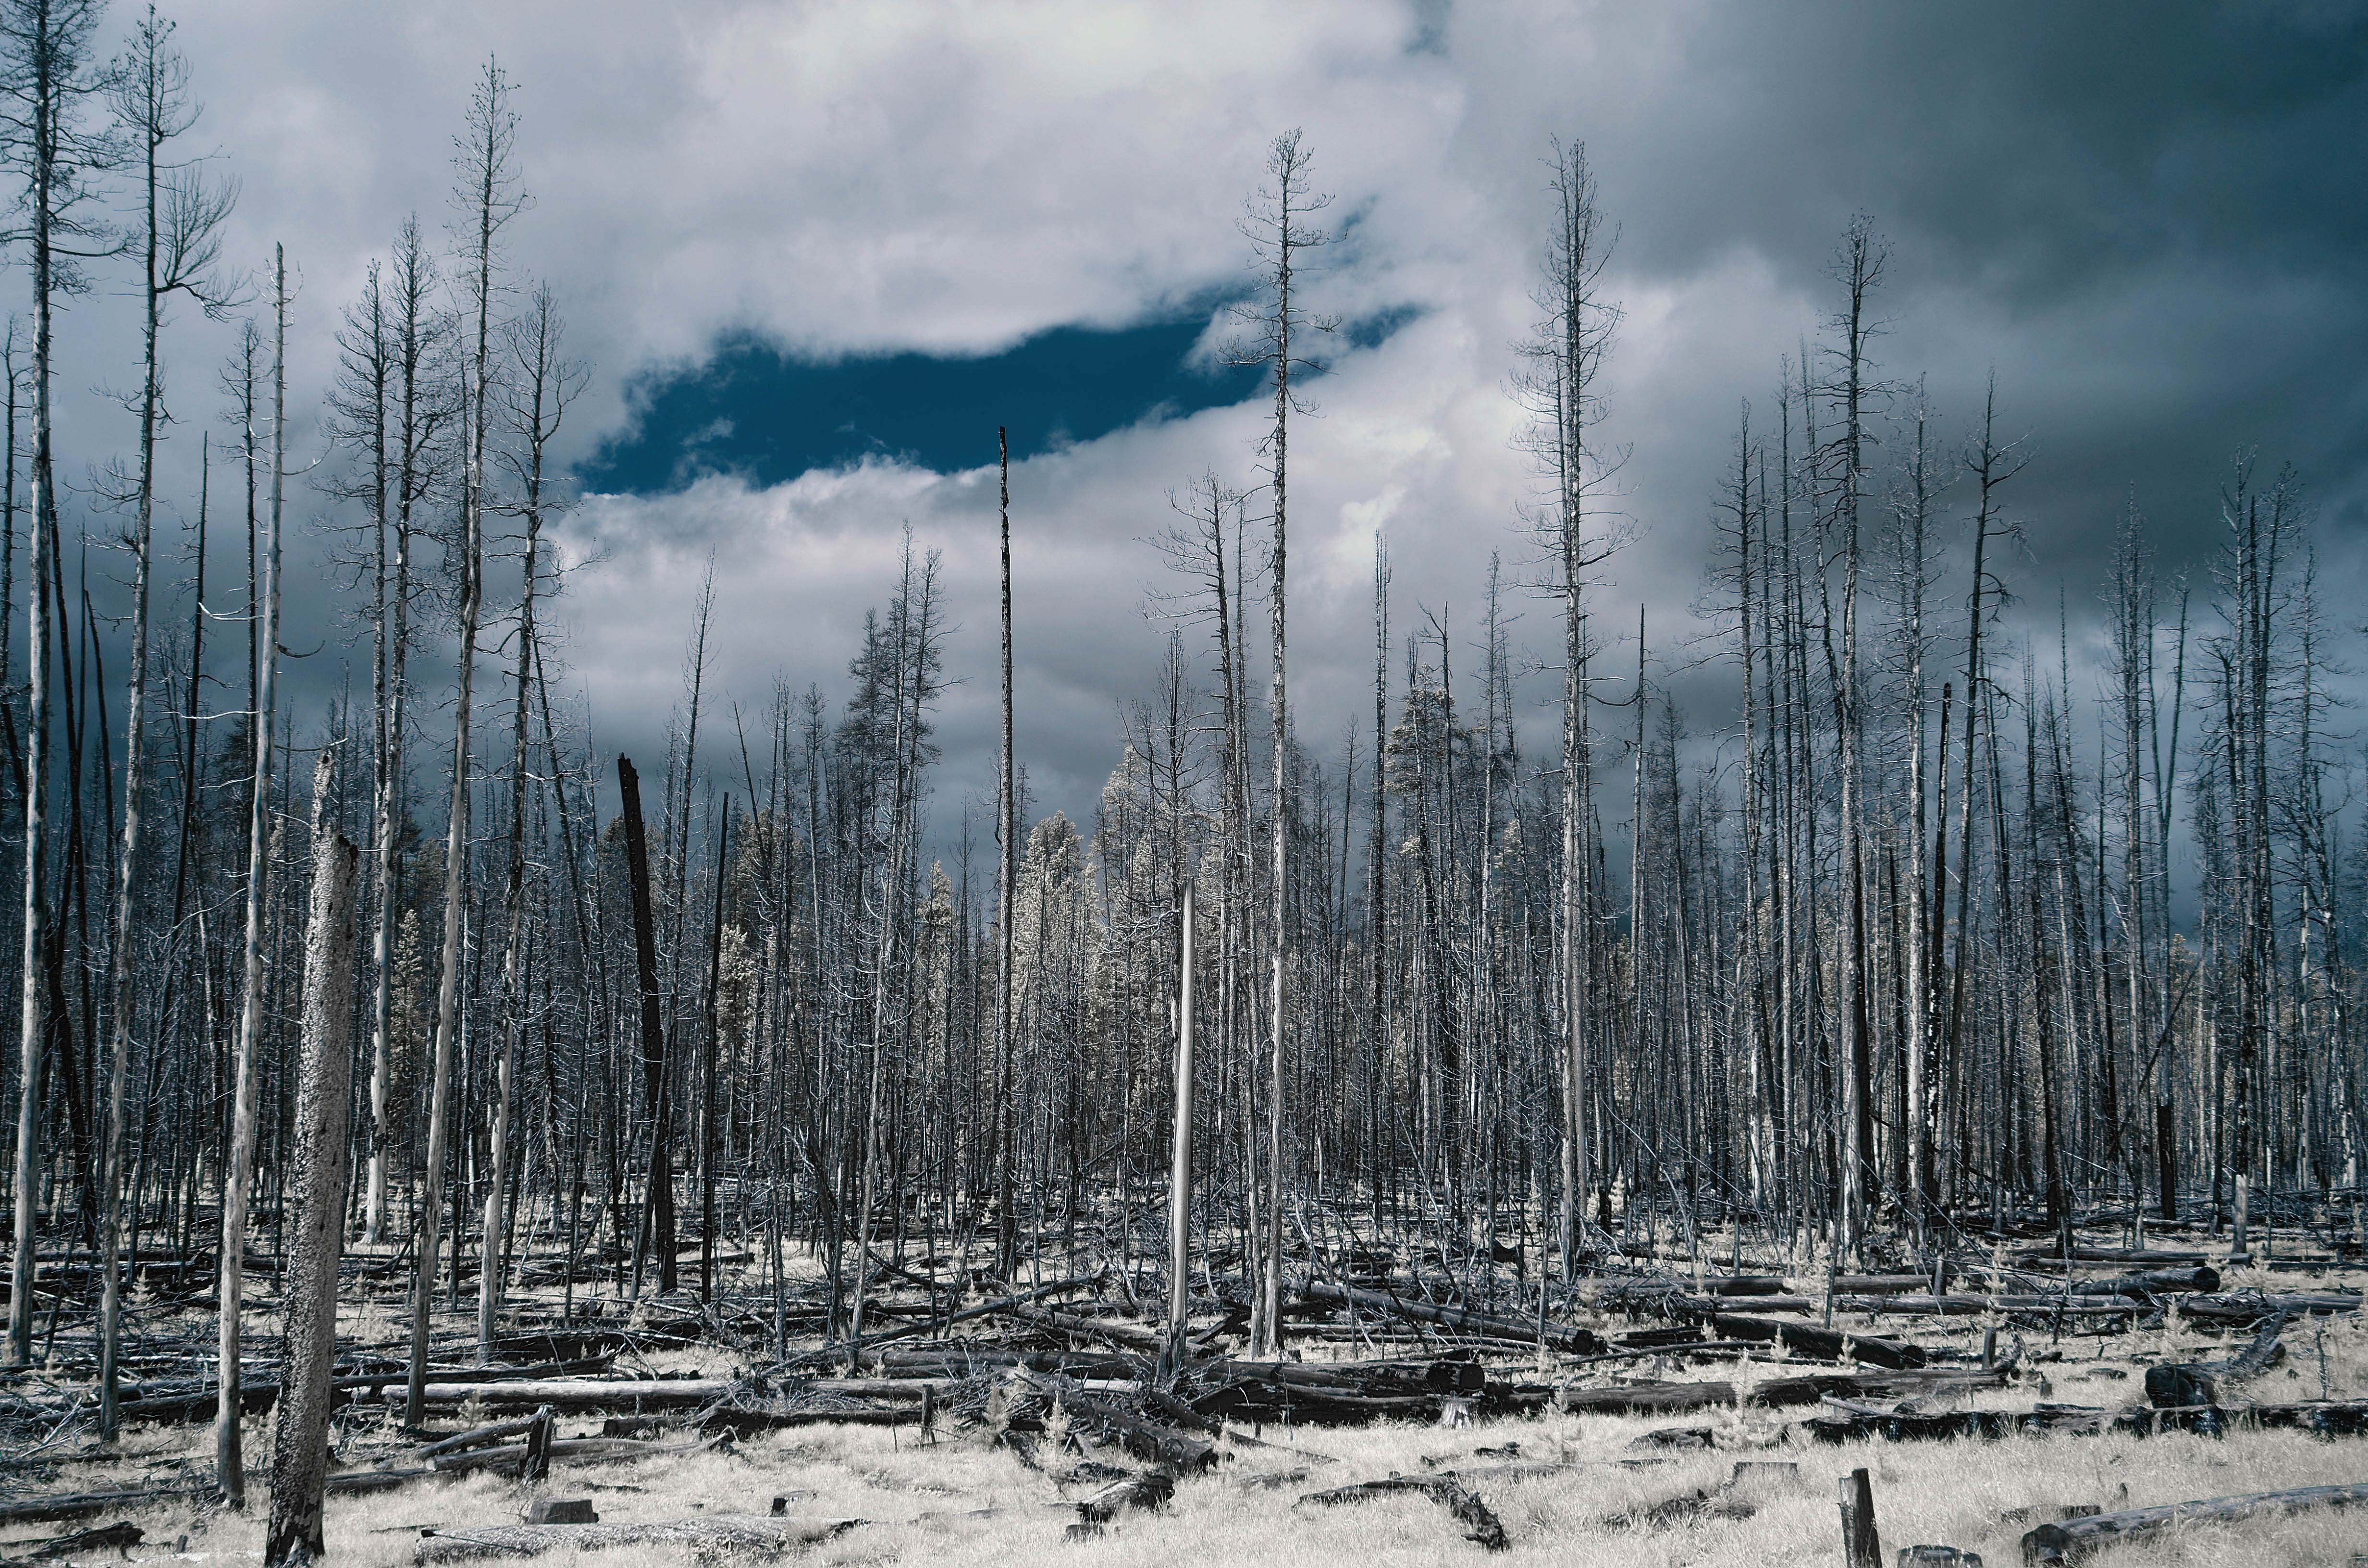 Burned Forest - Yellowstone, Wyoming - 2018